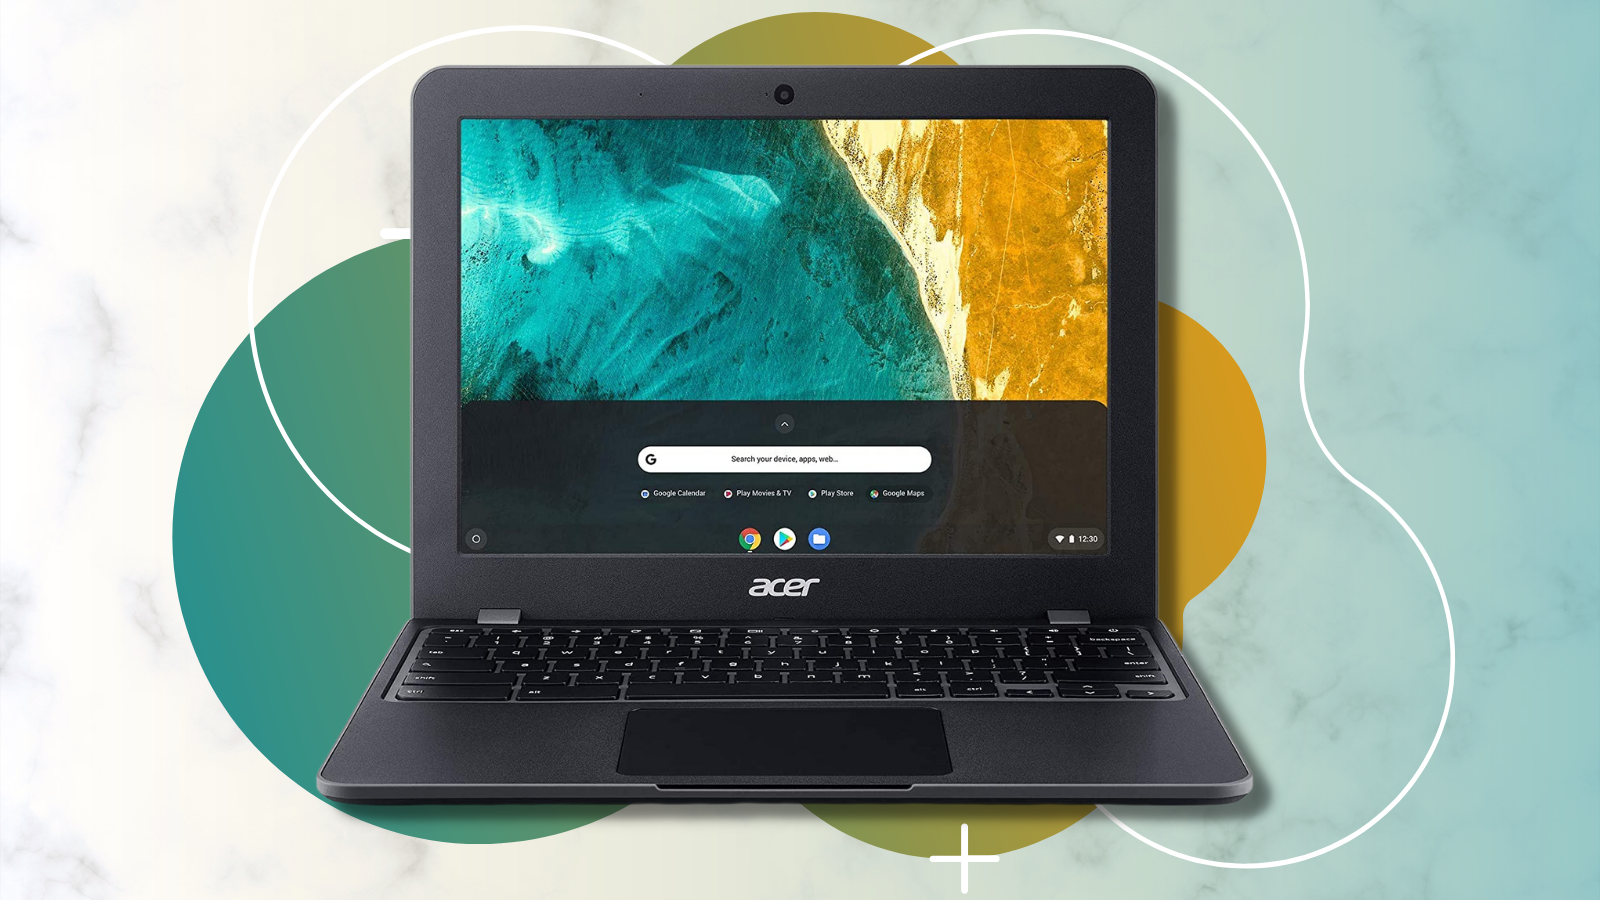 Prime Day 2 has brought us an Acer Chromebook on sale for only $80